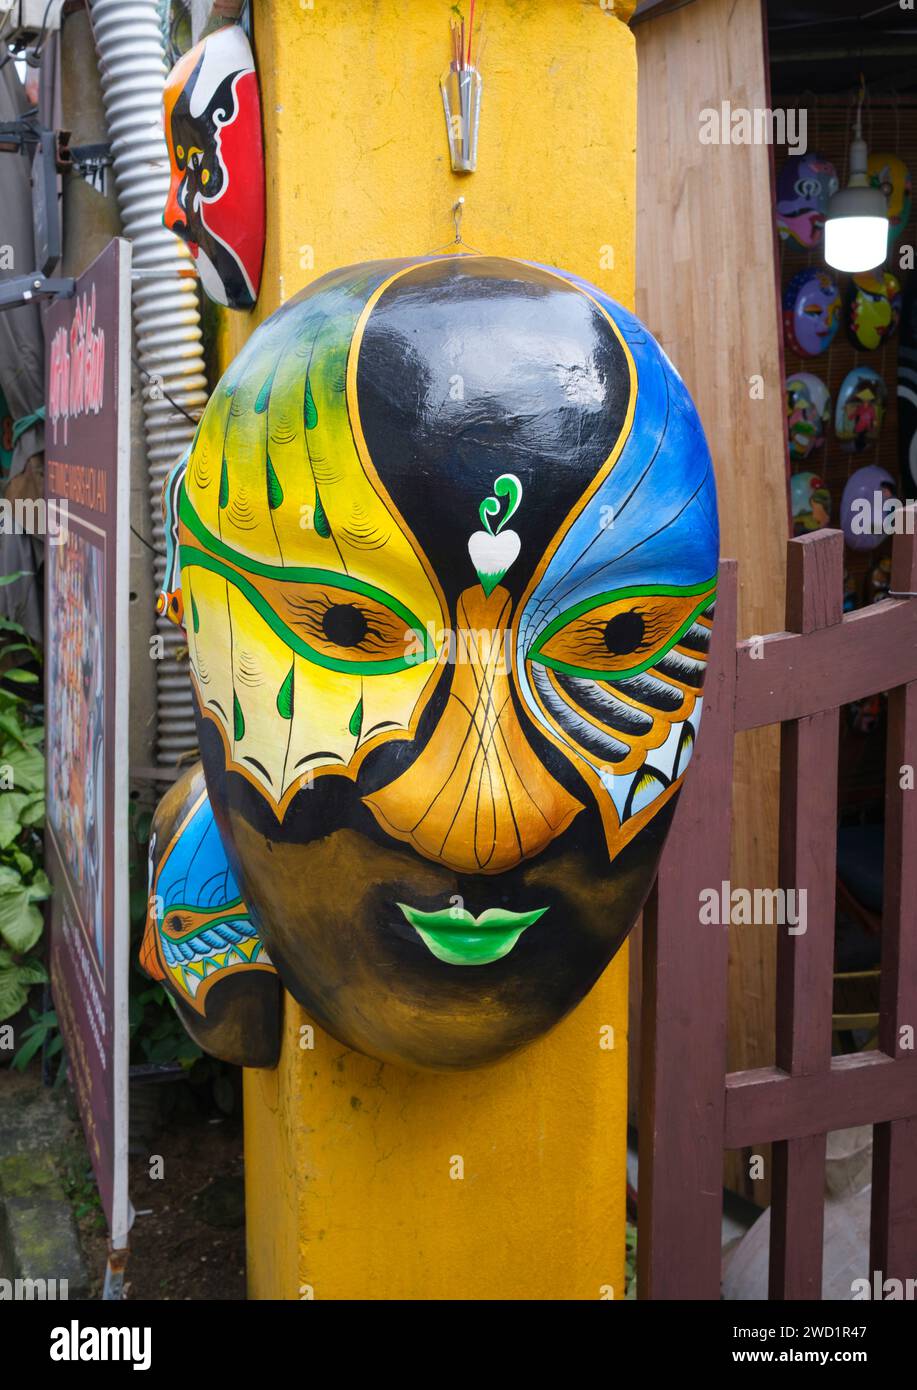 Vietnam: A colourful mask on the front gatepost of The Timing Mask, a company specialising in hand-made masks, Le Loi, Old Town, Hoi An. The small but historic town of Hoi An is located on the Thu Bon River 30km (18 miles) south of Danang. During the time of the Nguyen Lords (1558 - 1777) and even under the first Nguyen Emperors, Hoi An - then known as Faifo - was an important port, visited regularly by shipping from Europe and all over the East. Stock Photo